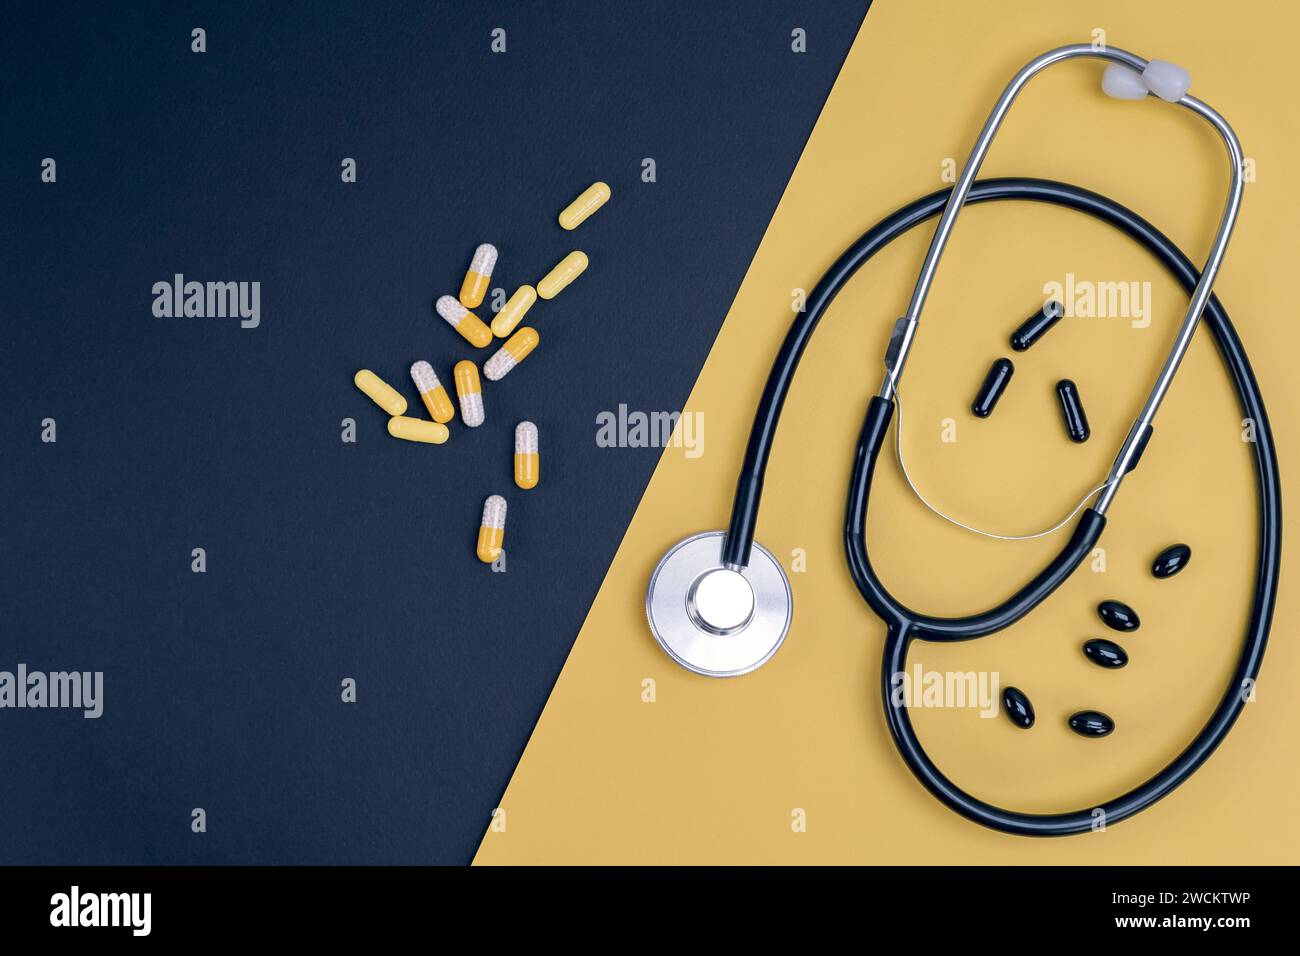 Stethoscope and capsules on yellow and black background. Healthcare, medical exam, insurance,  concept. Stock Photo